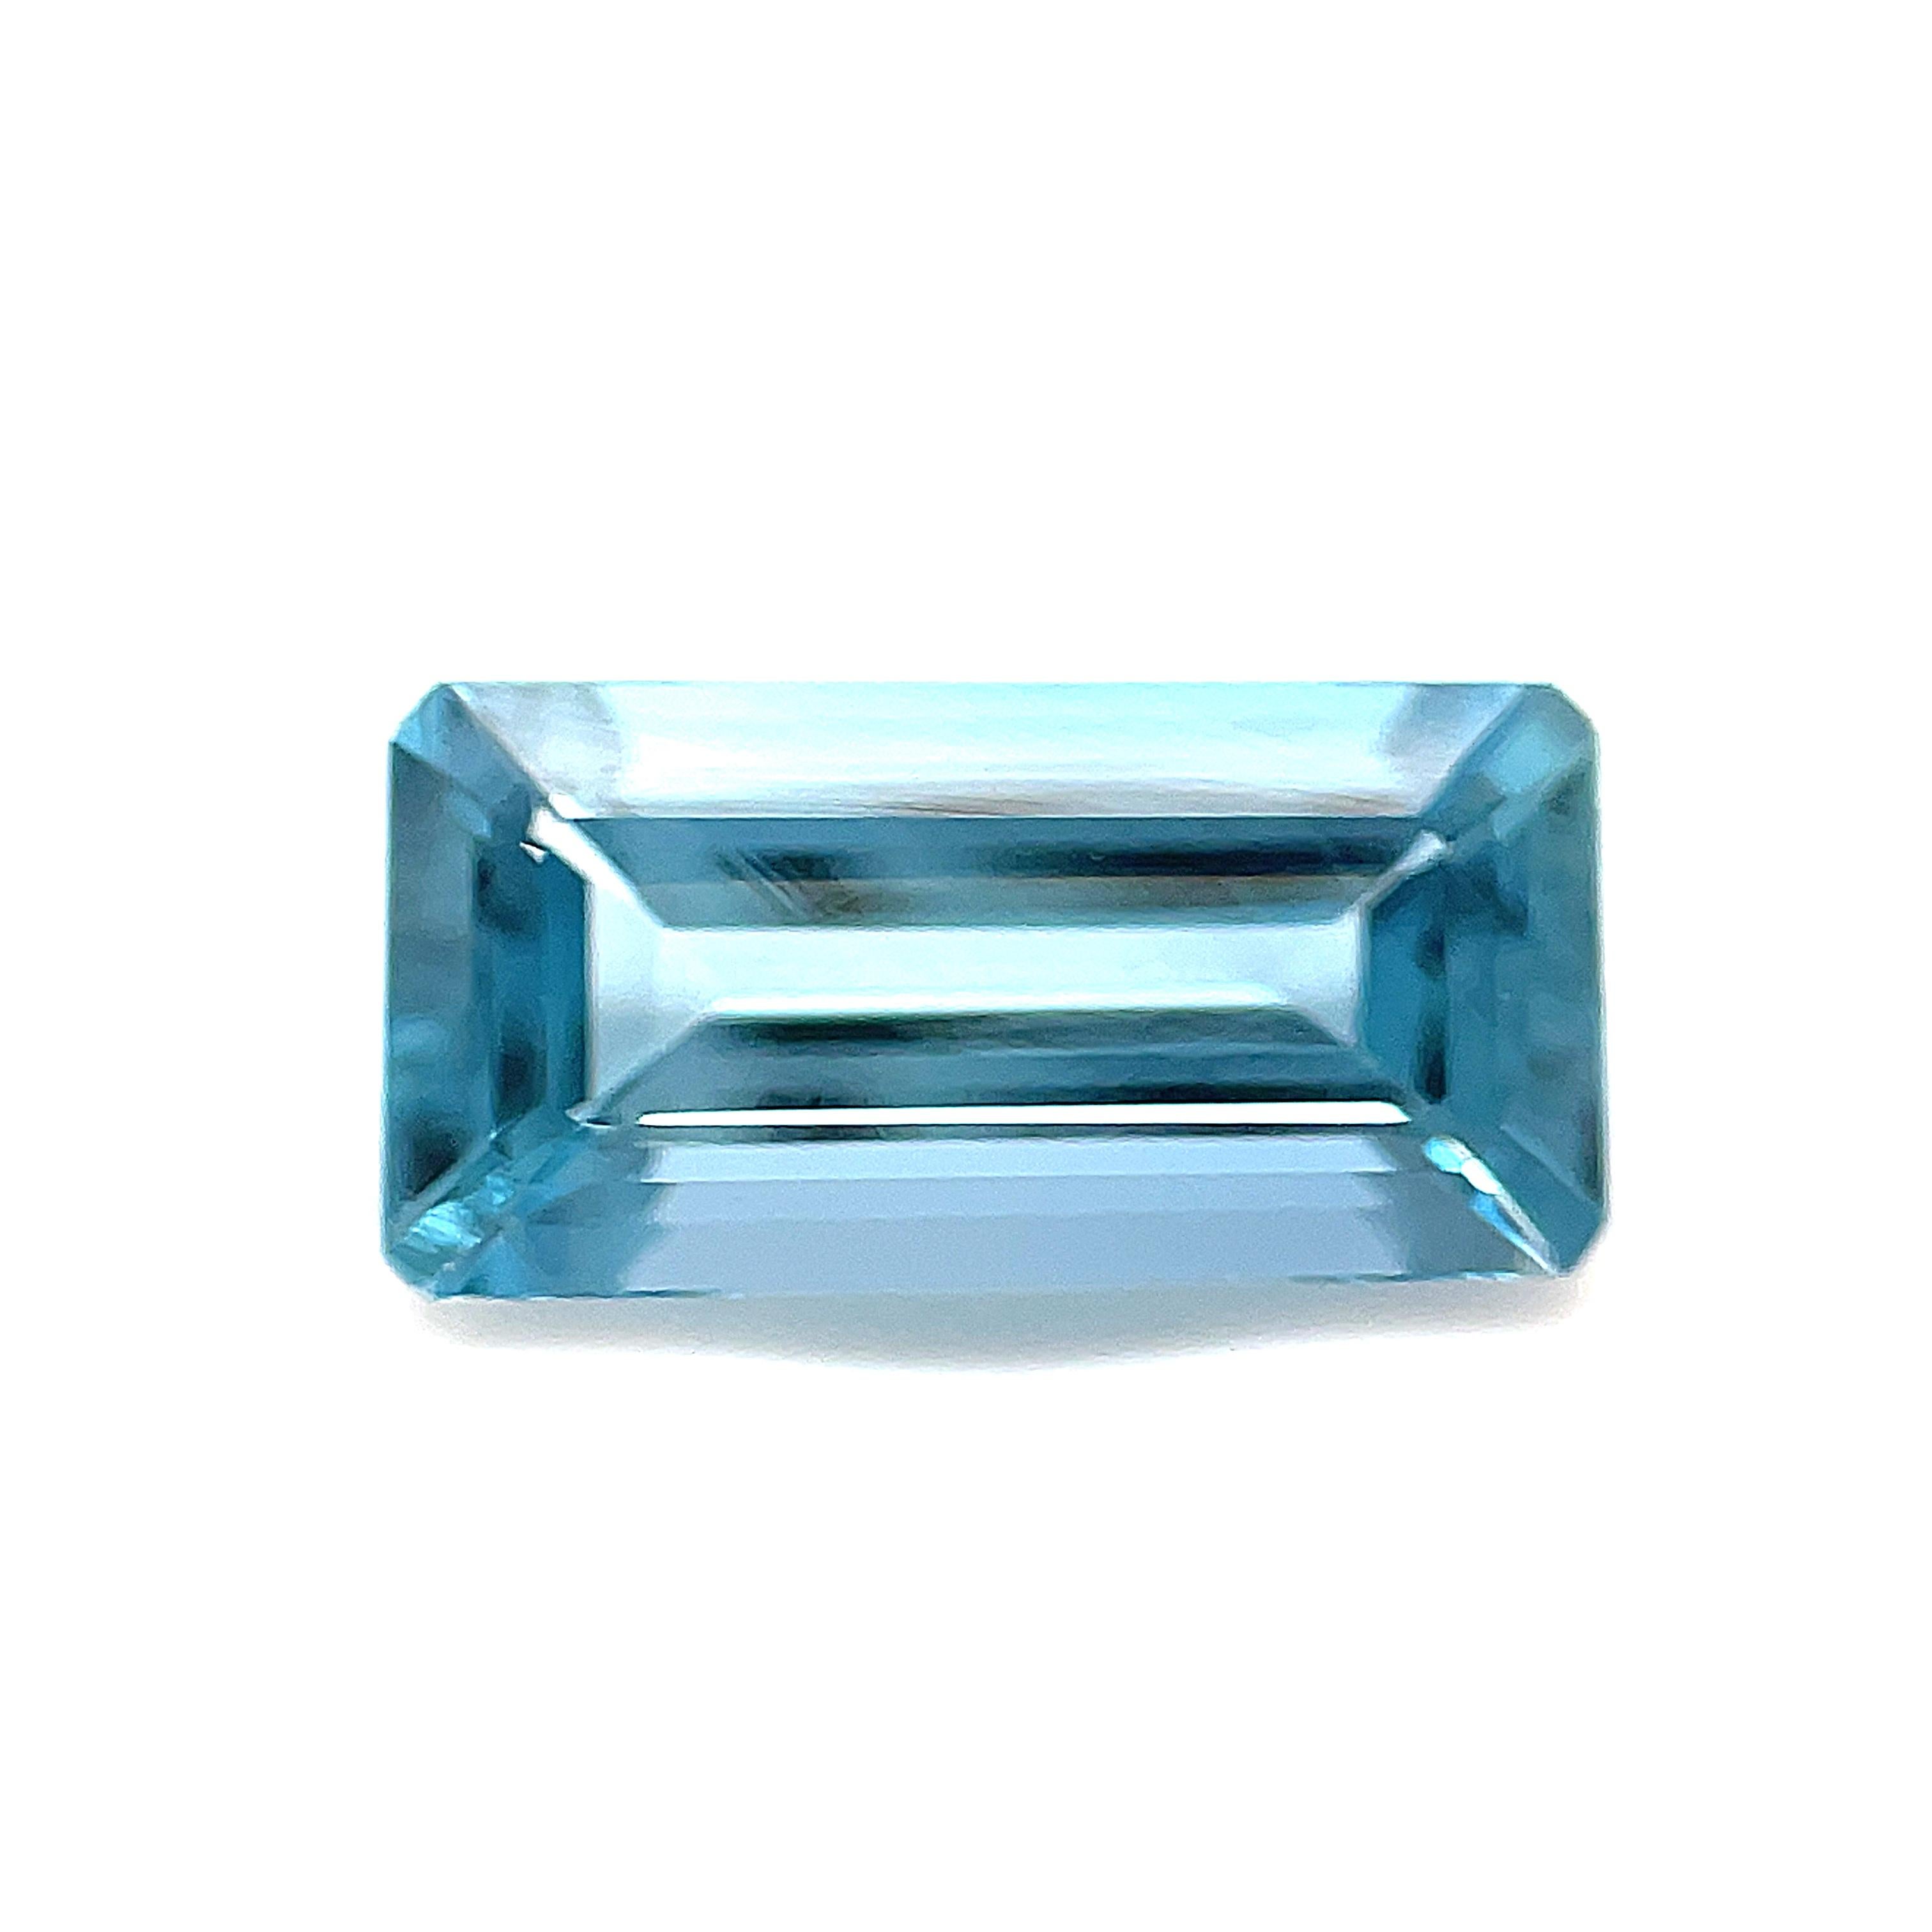 This 3.37 carat octagonal emerald-cut aquamarine is really impressive! It has a gorgeous blue color and exceptional brilliance and life. Measuring 13.97 x 7.16, it has an elegant elongated shape and is cut in a way that gives it the appearance of a